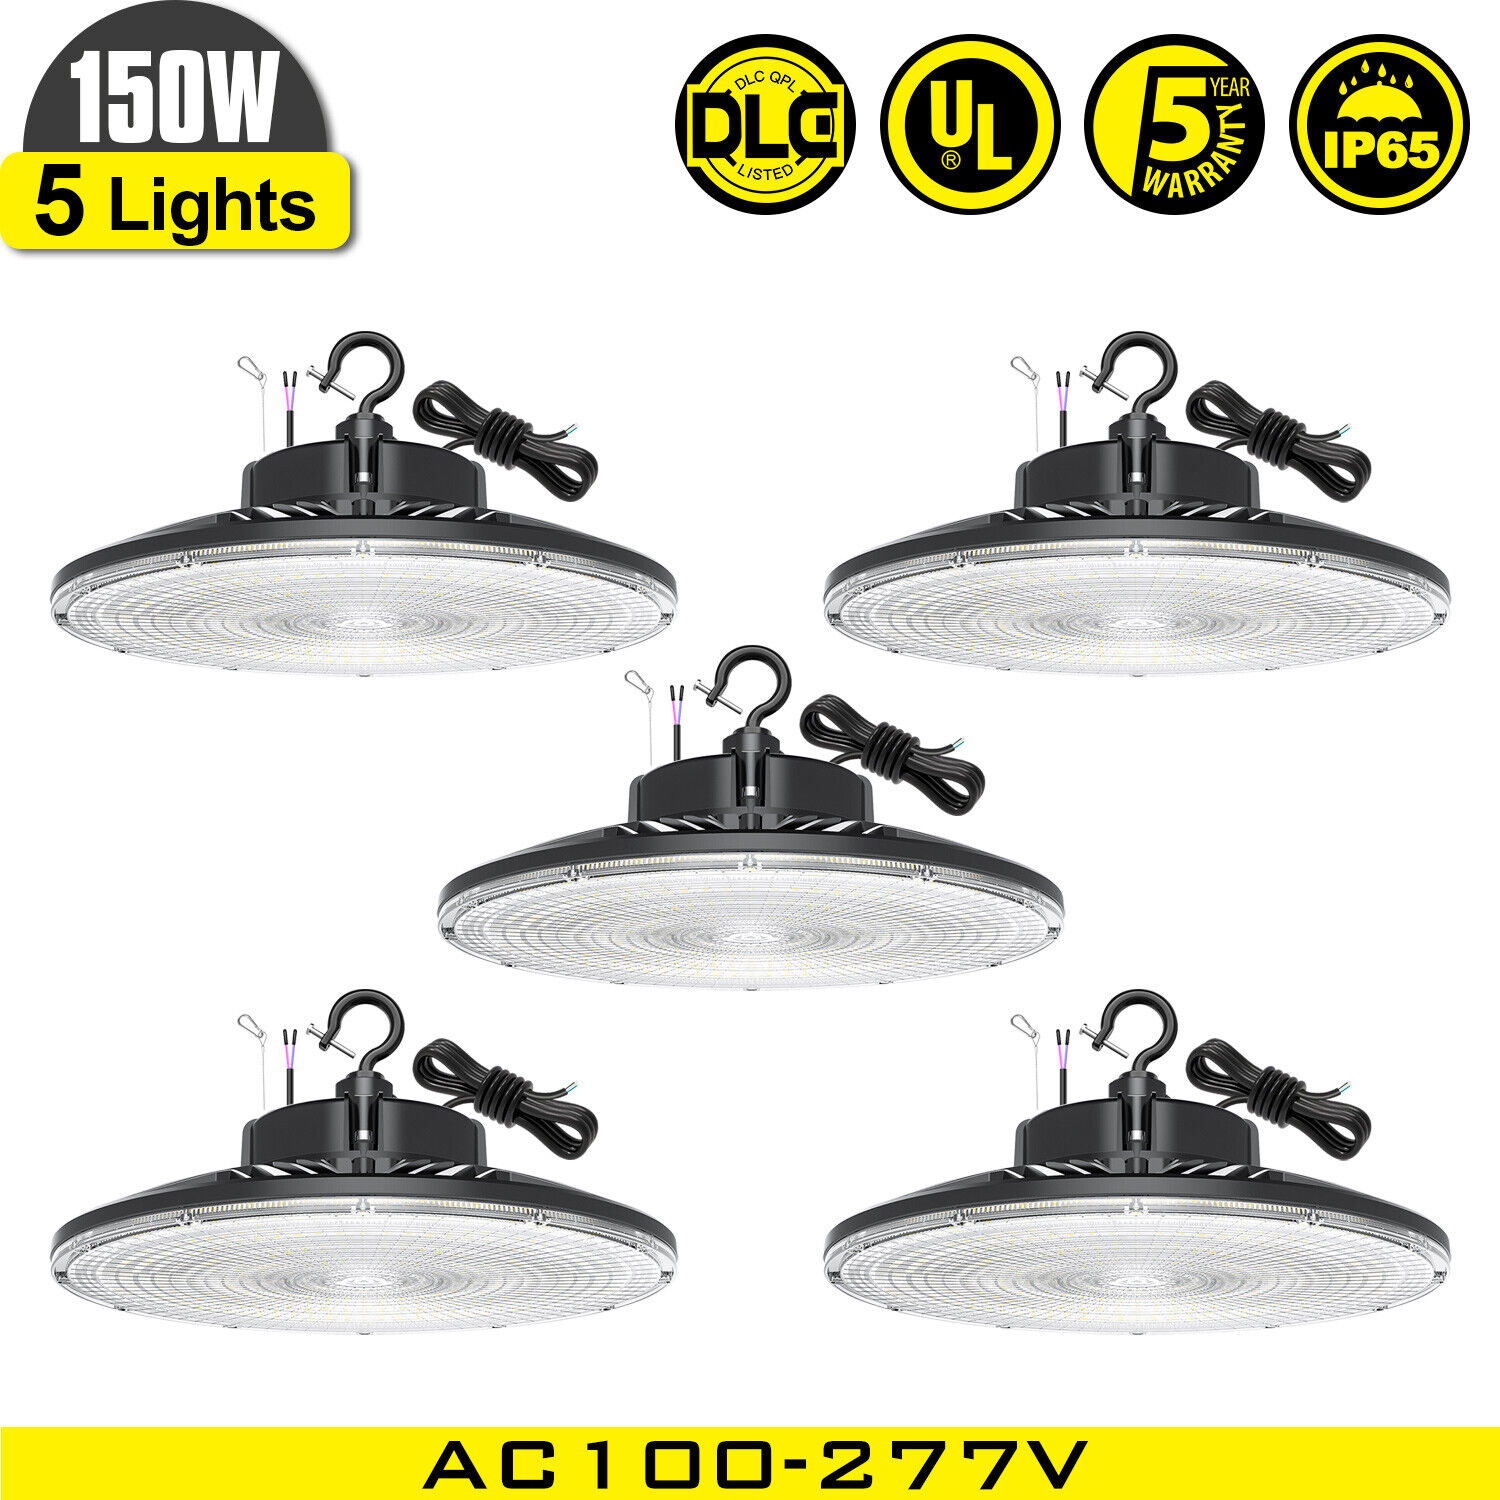 5X 150W LED UFO High Bay Light Fixture Dimmable Commercial Warehouse Shop Light